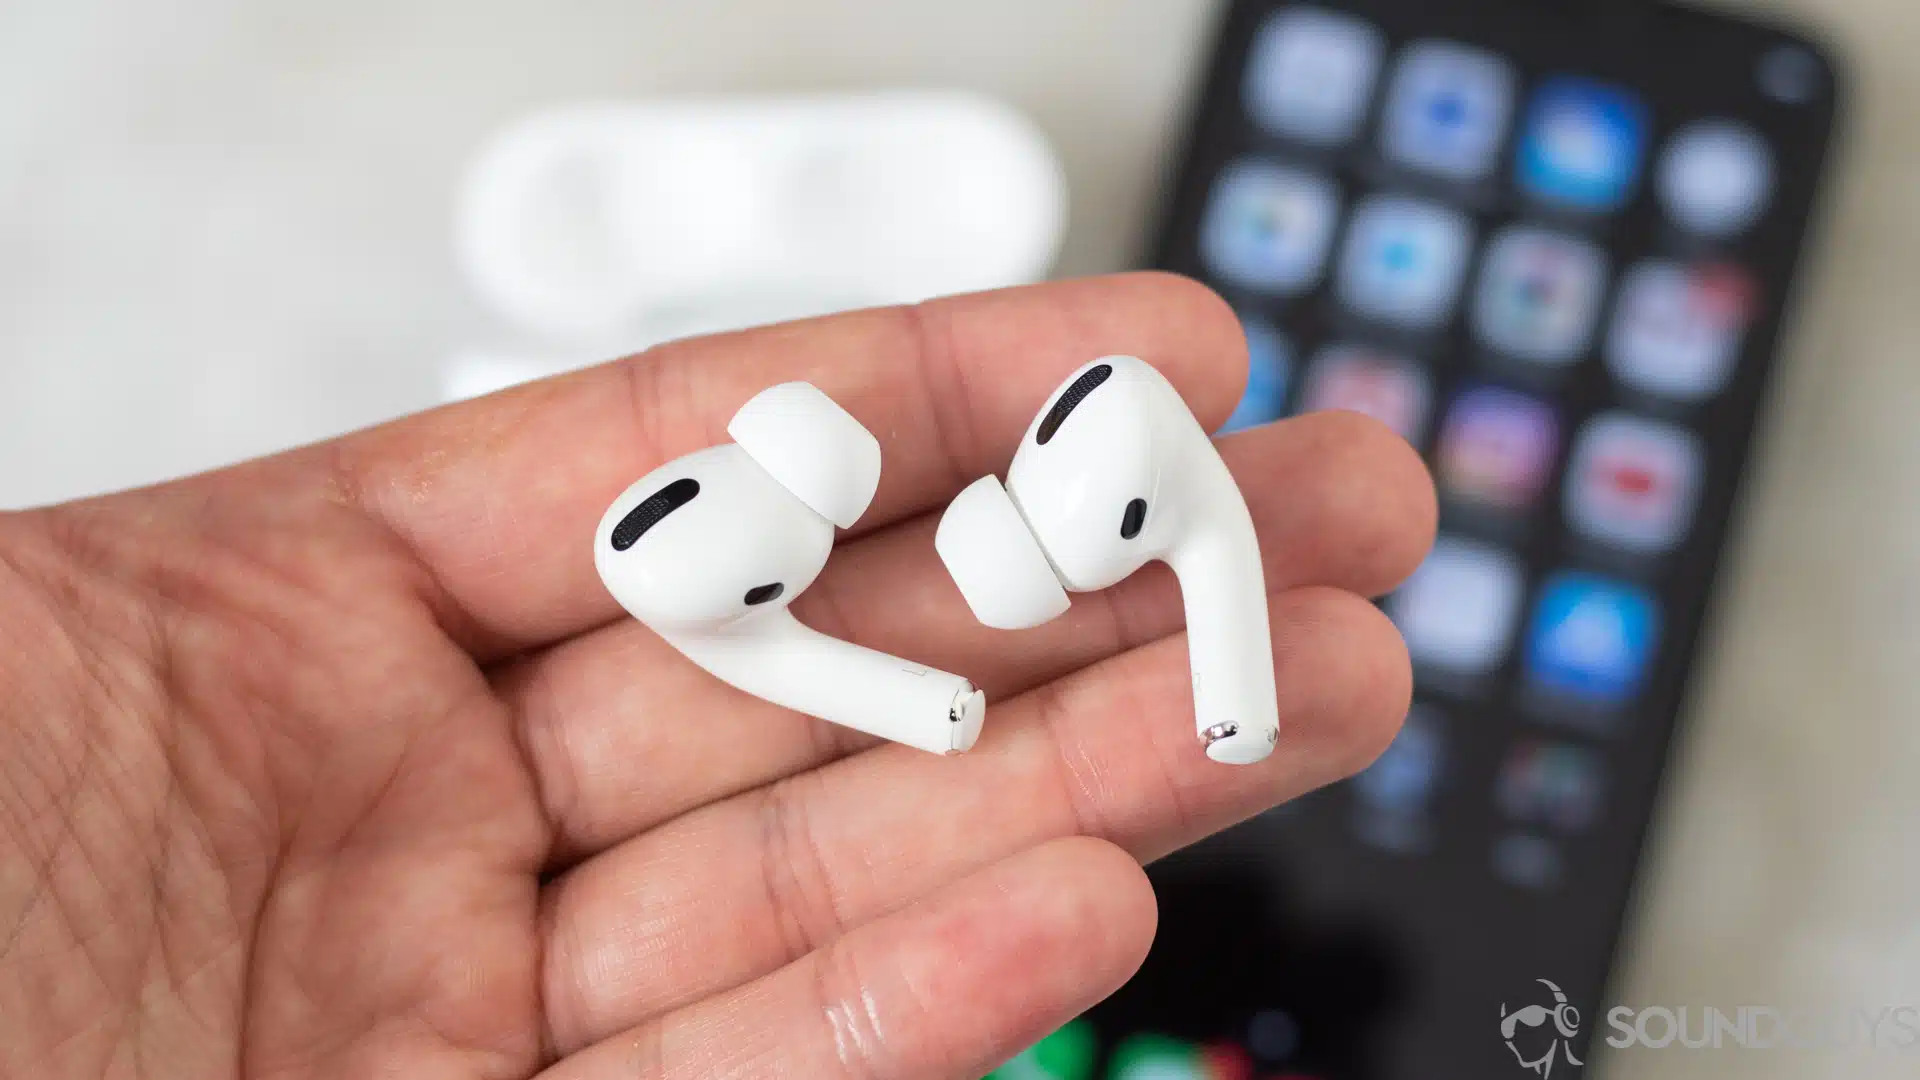 How to track your lost Apple AirPods
Lost earbud? Here’s how you can track its location 2023